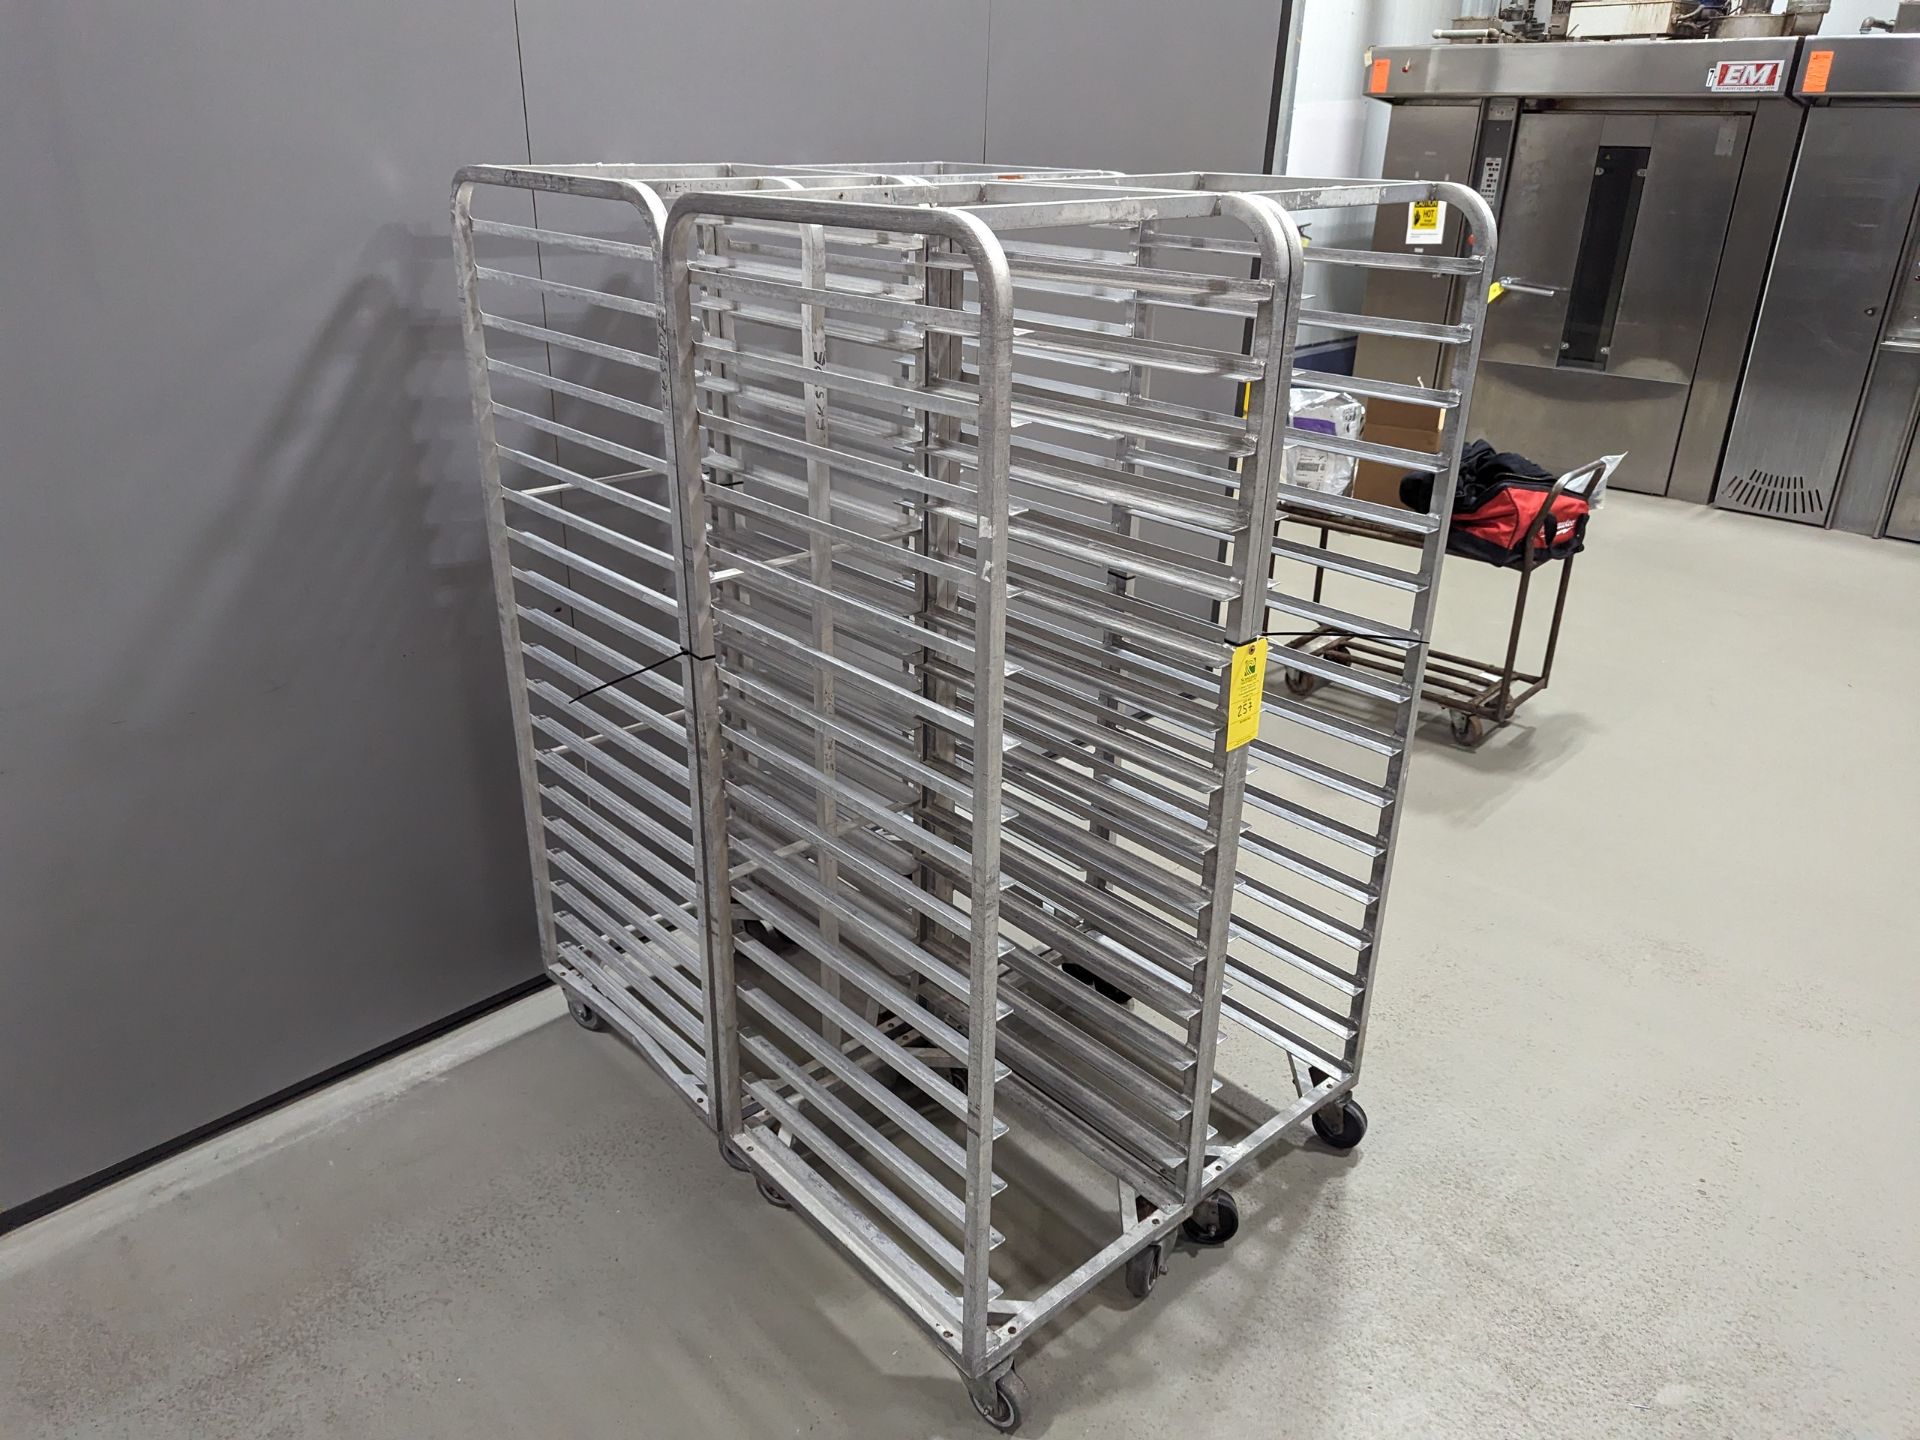 Lot of 4 Single Wide Aluminum Bakery Racks, Dimensions LxWxH: 53x41x69 Measurements are for lot of - Image 3 of 6